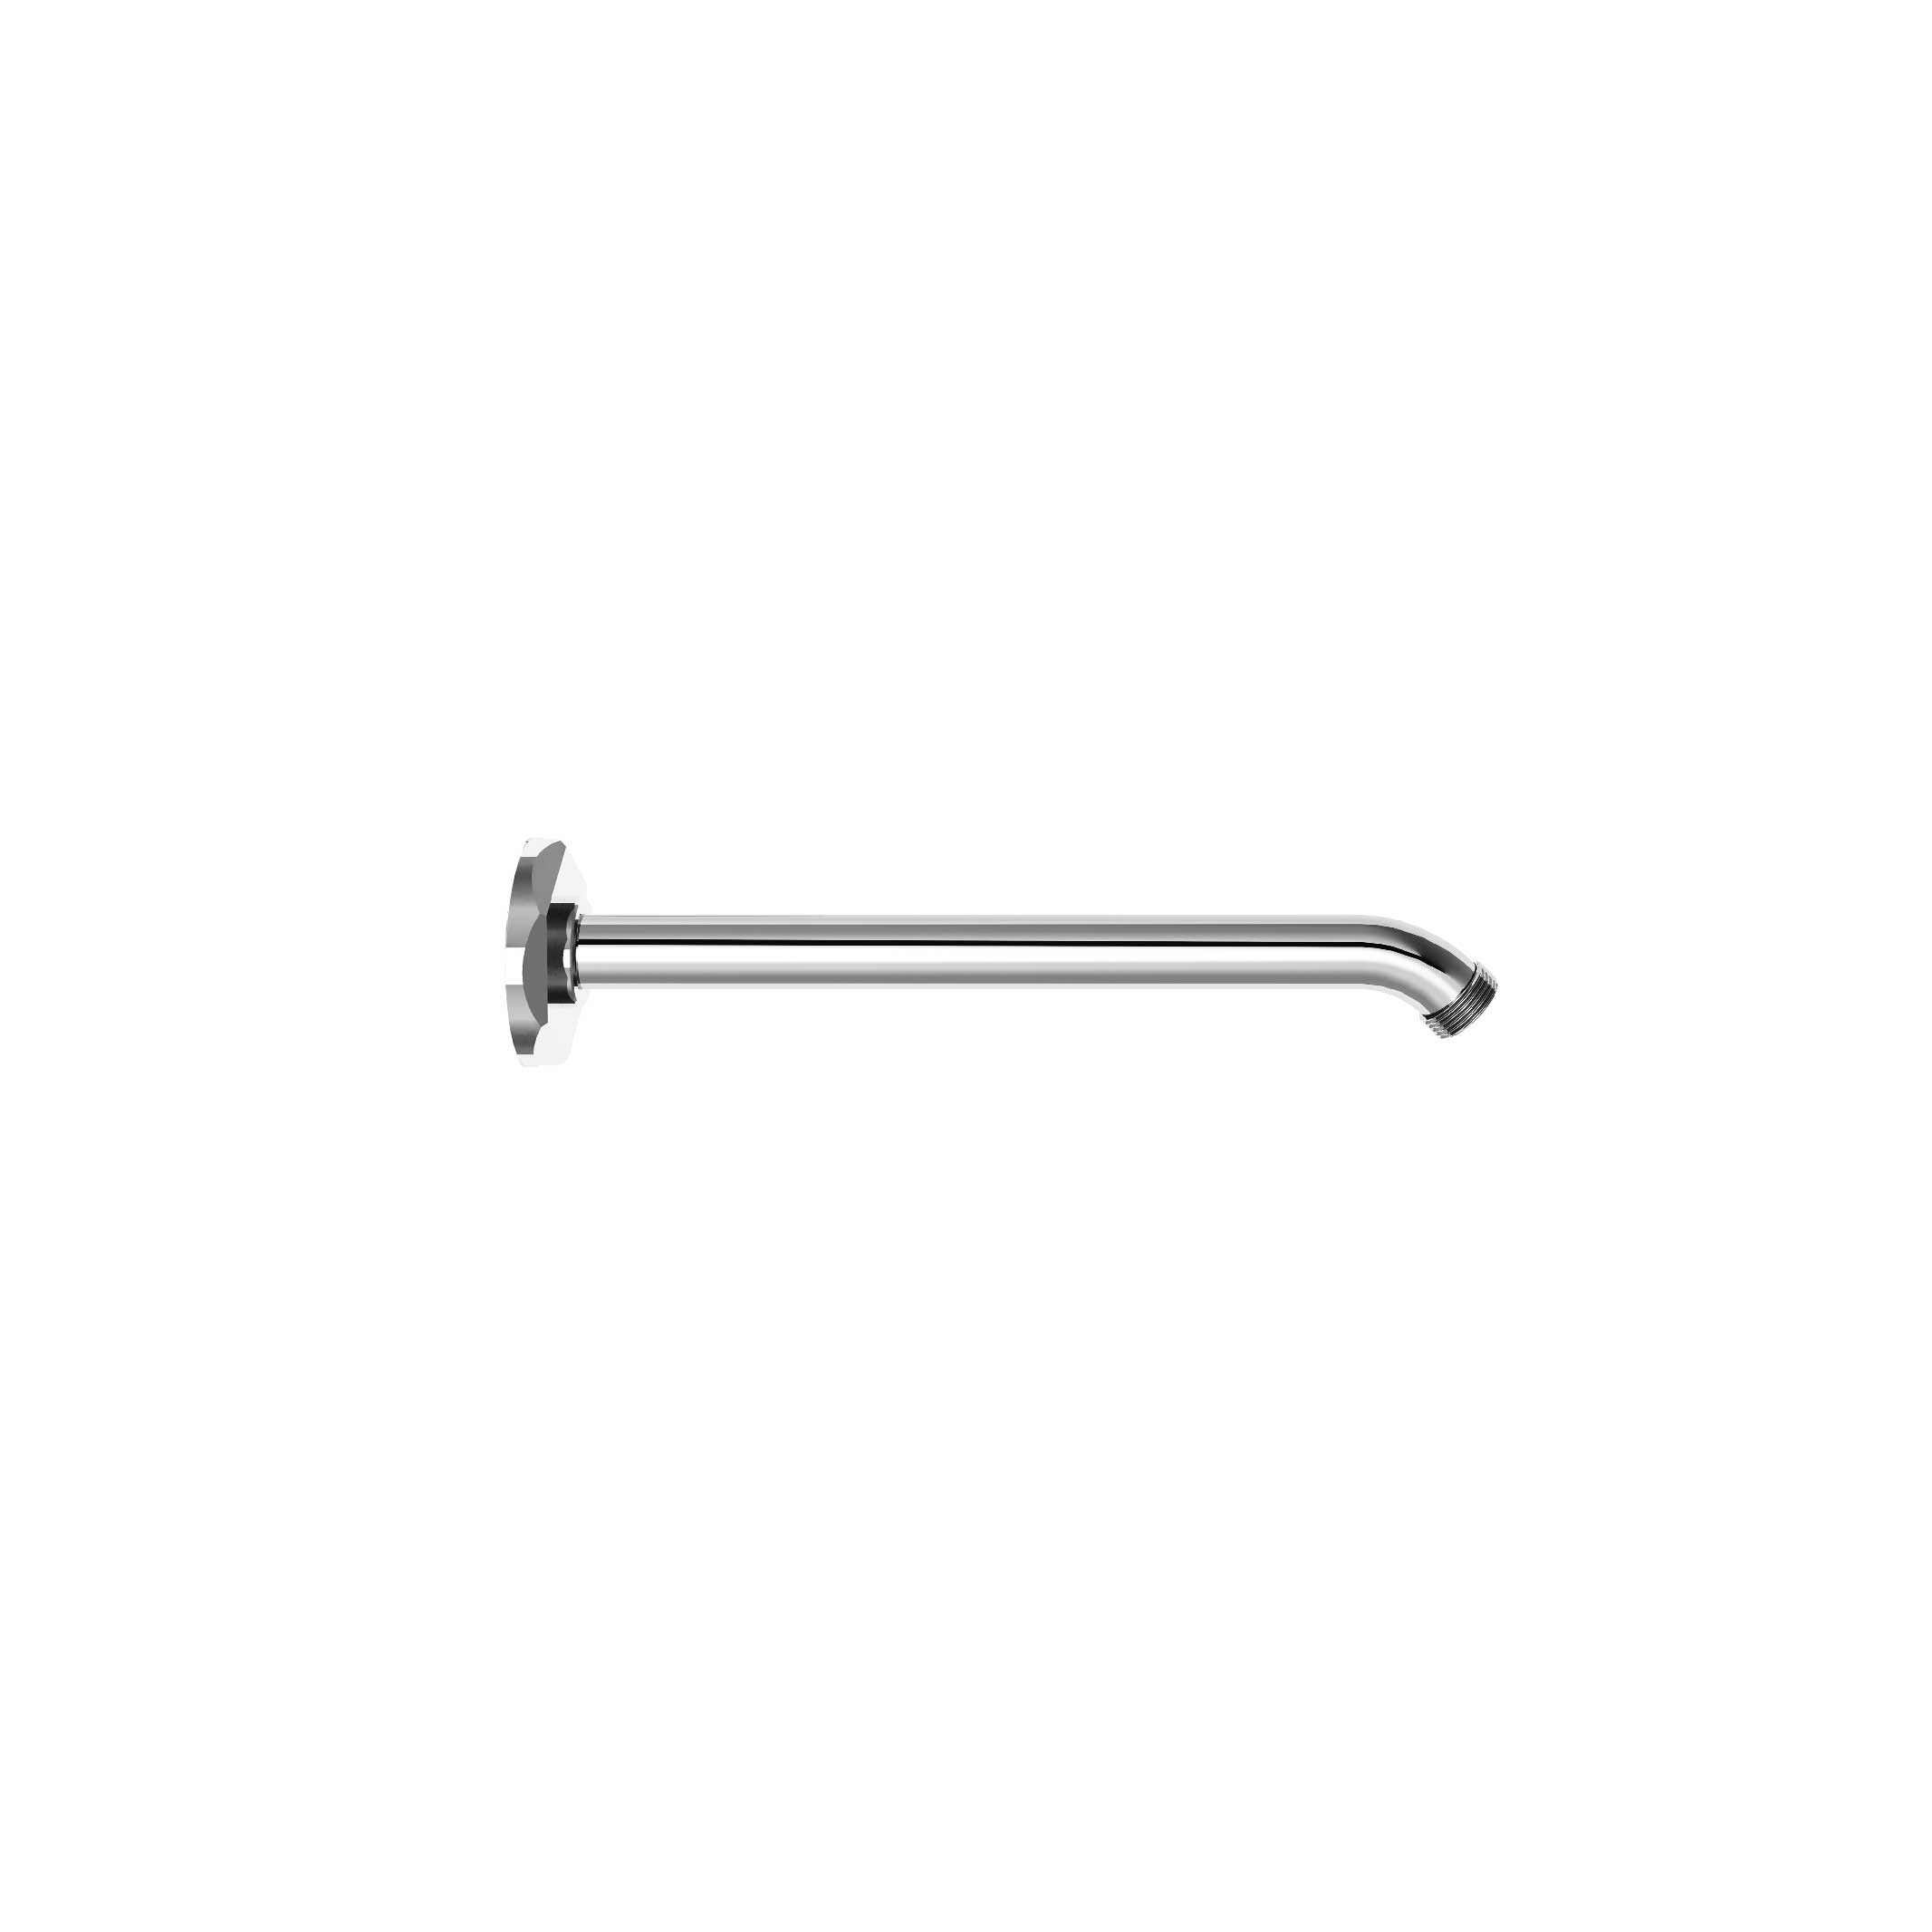 M13-2W170 Wall mounted shower arm 170mm